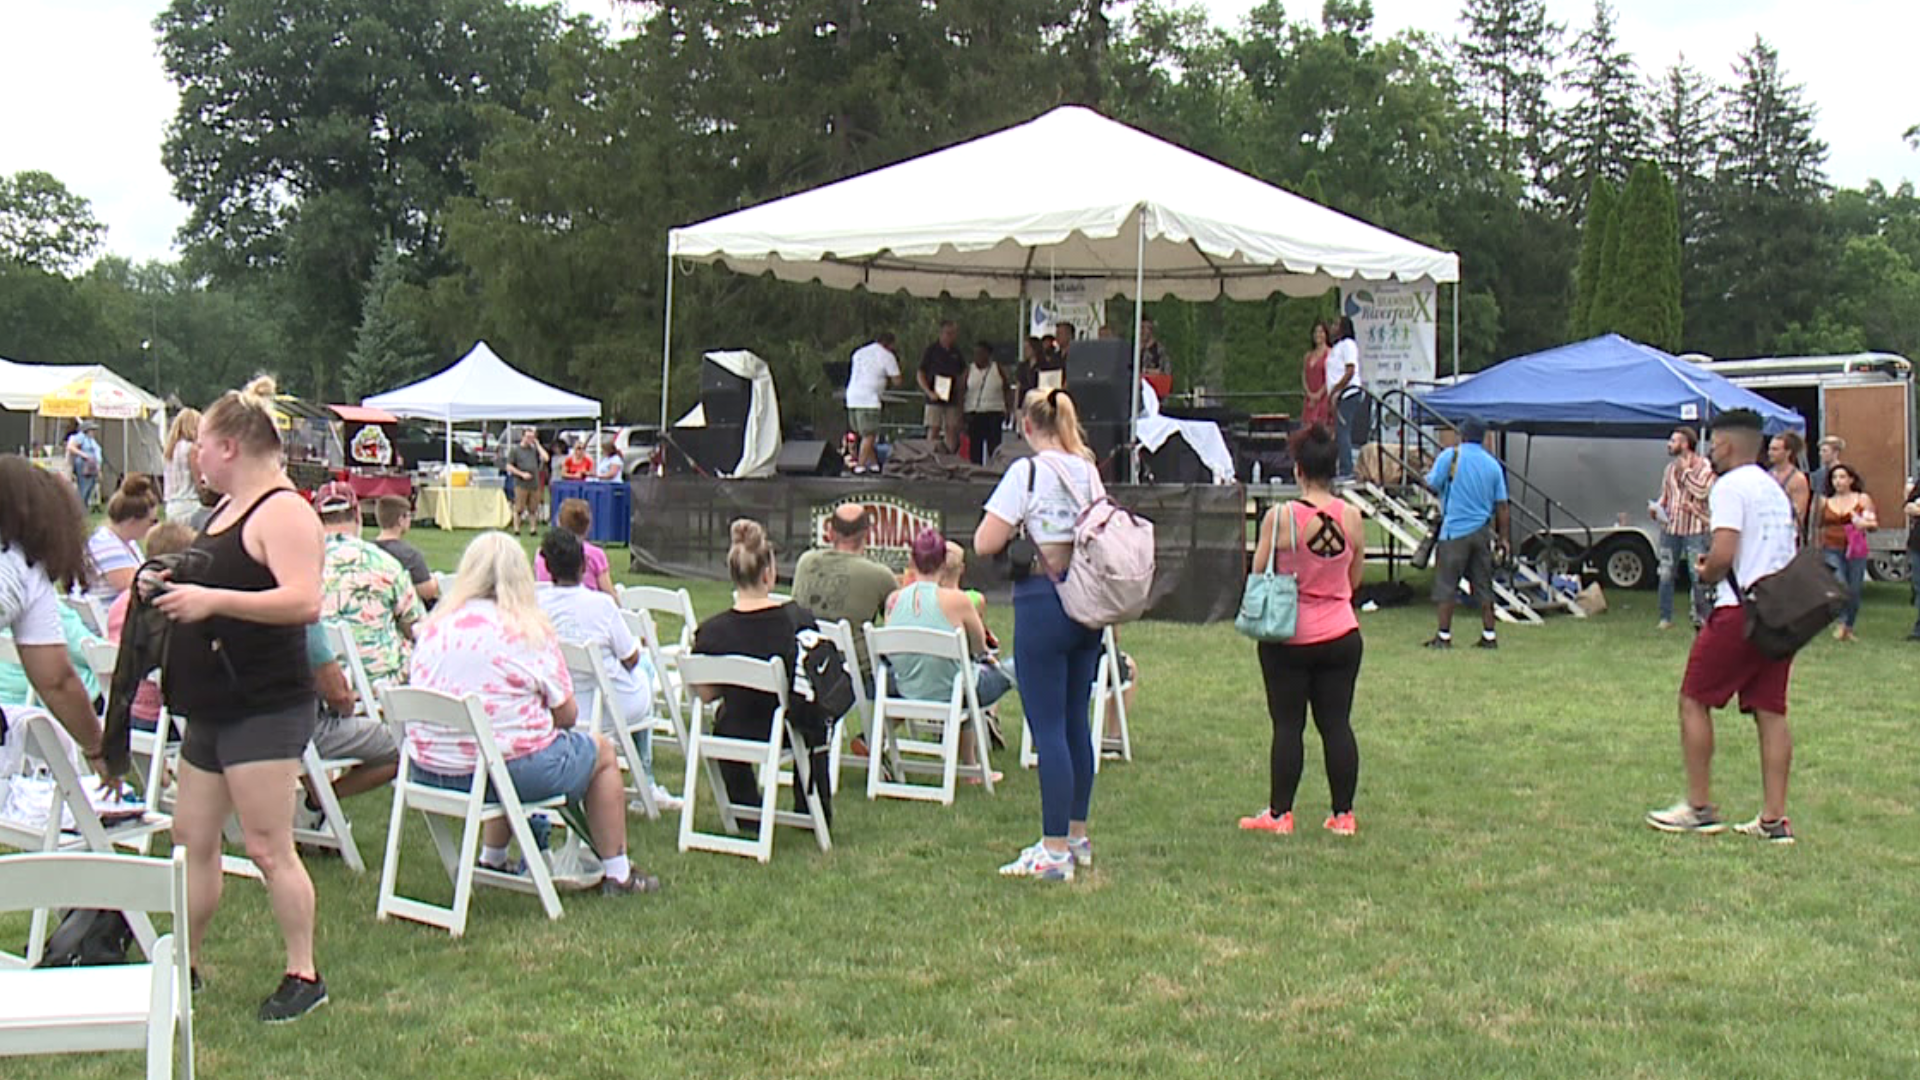 This year's Riverfest at Shawnee honored front-line workers.